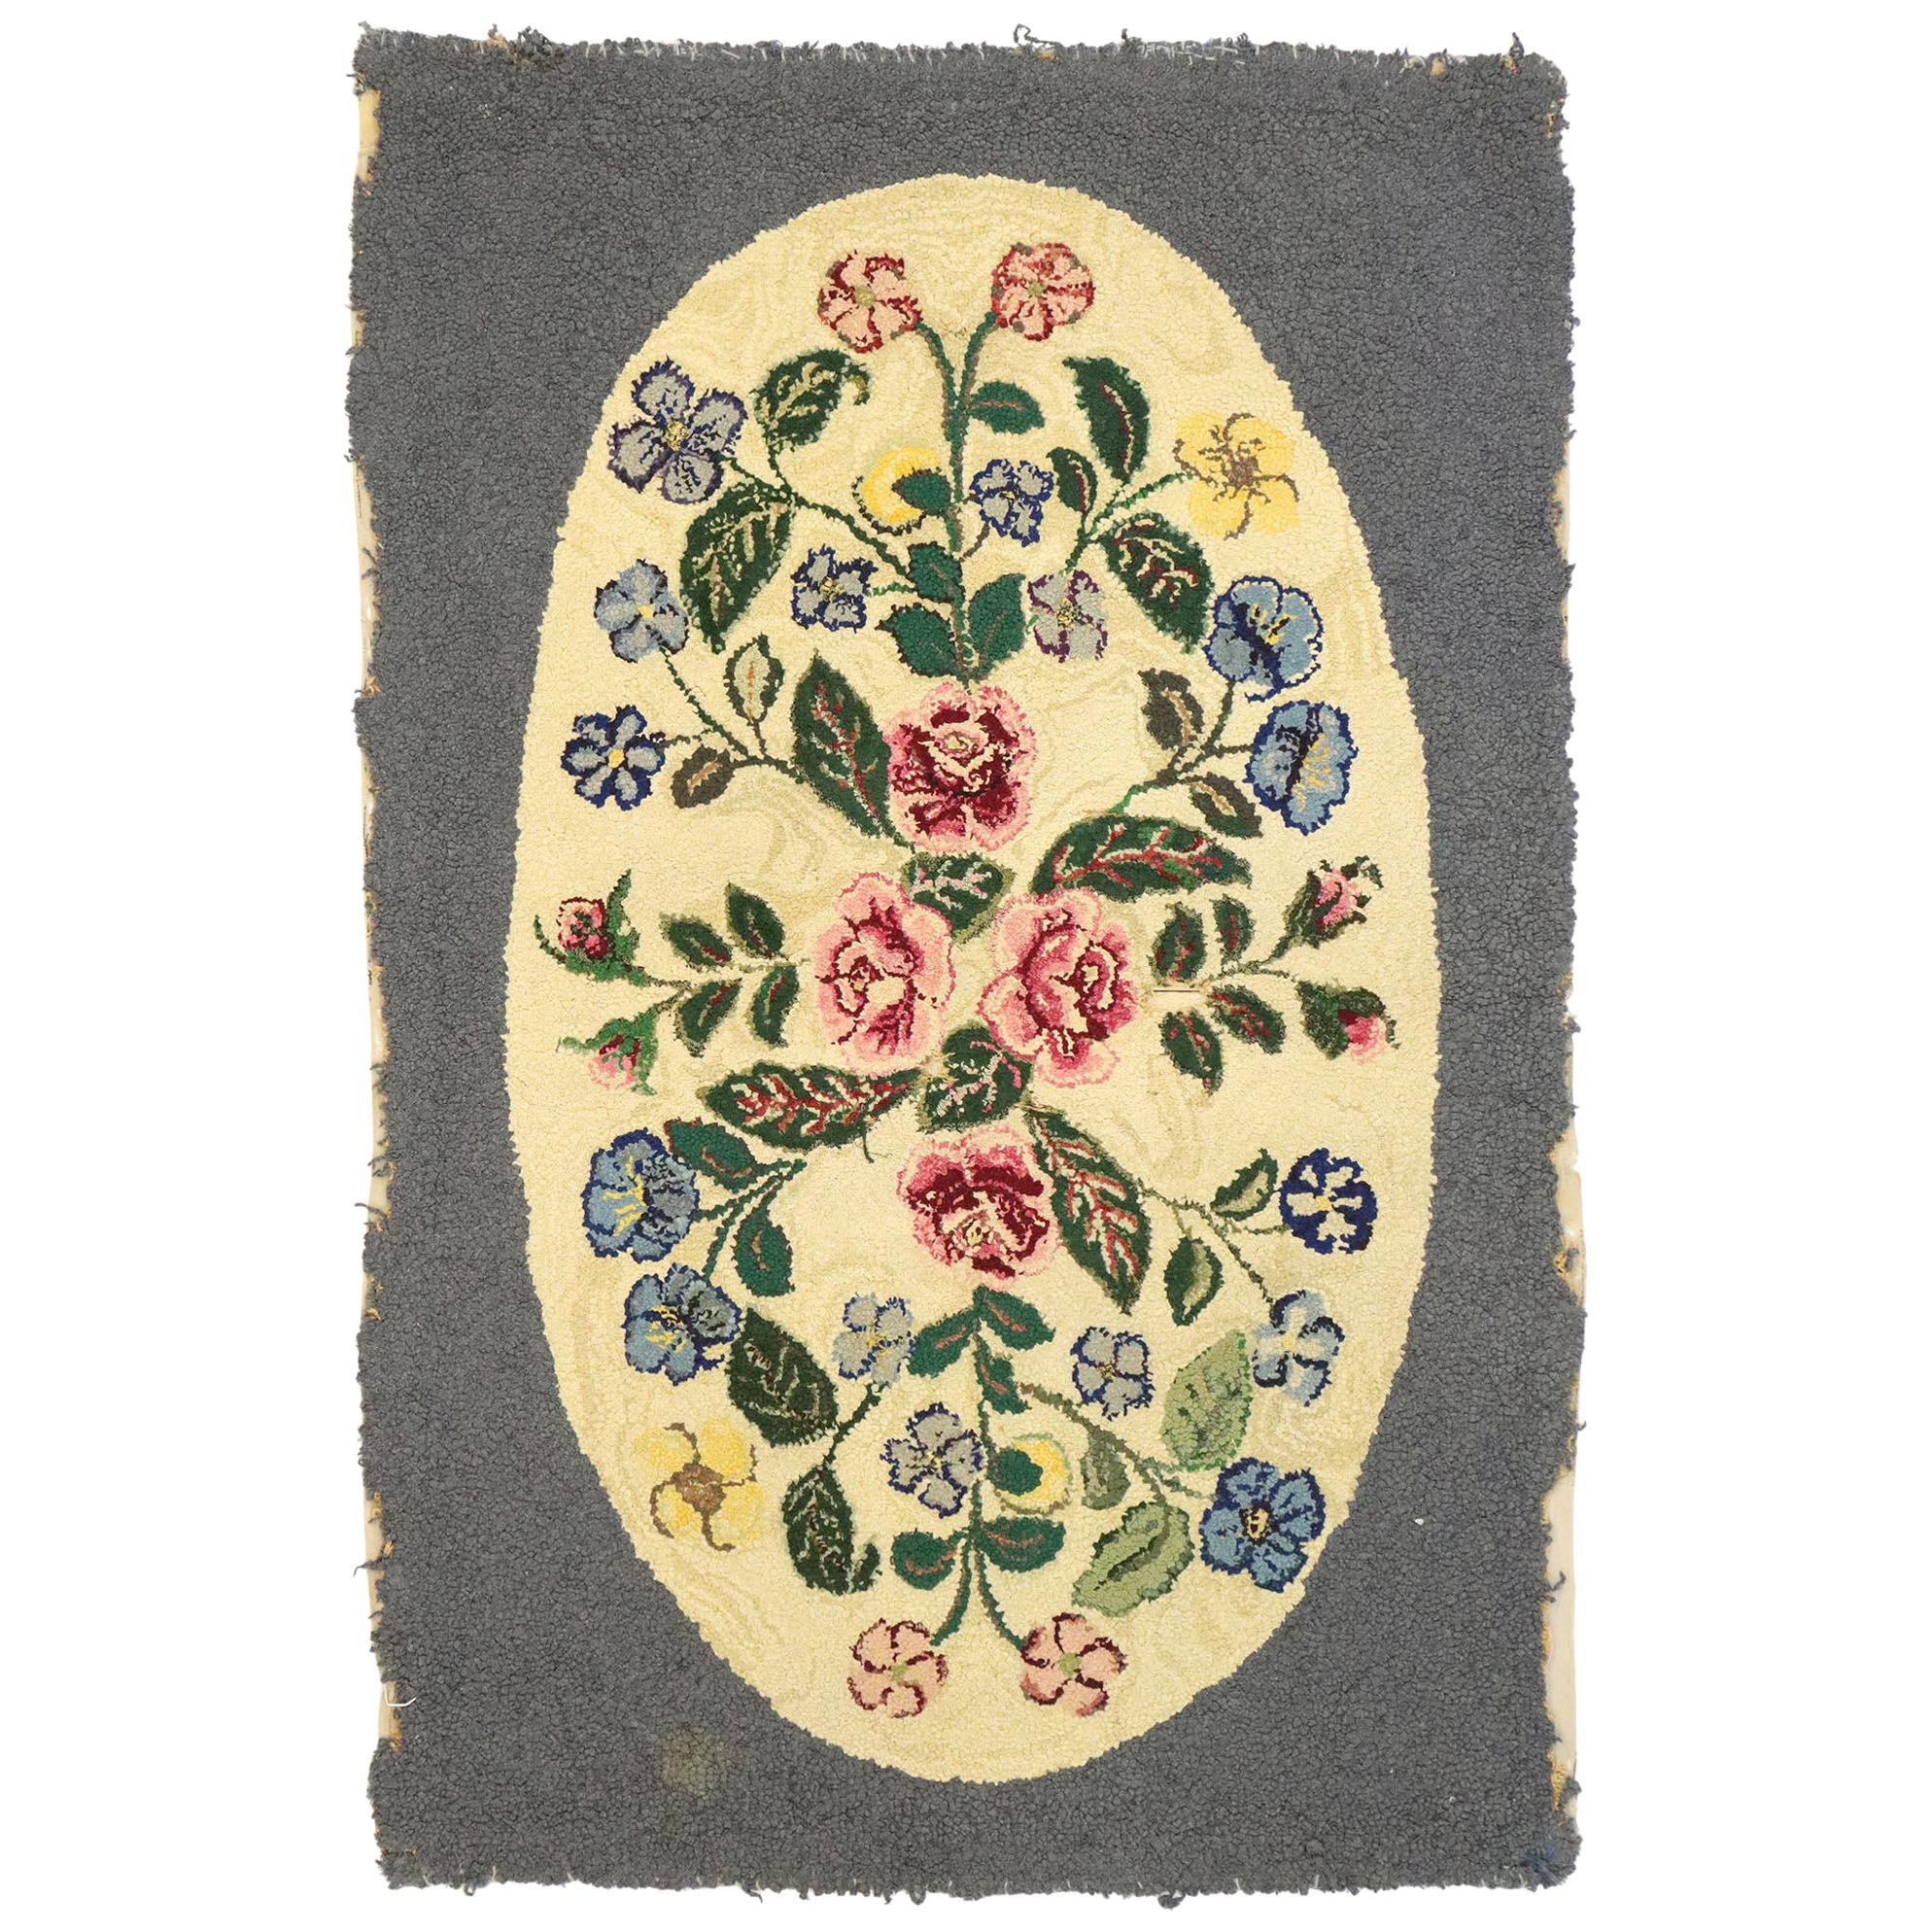 Antique American Floral Hooked Rug with English Chintz Style